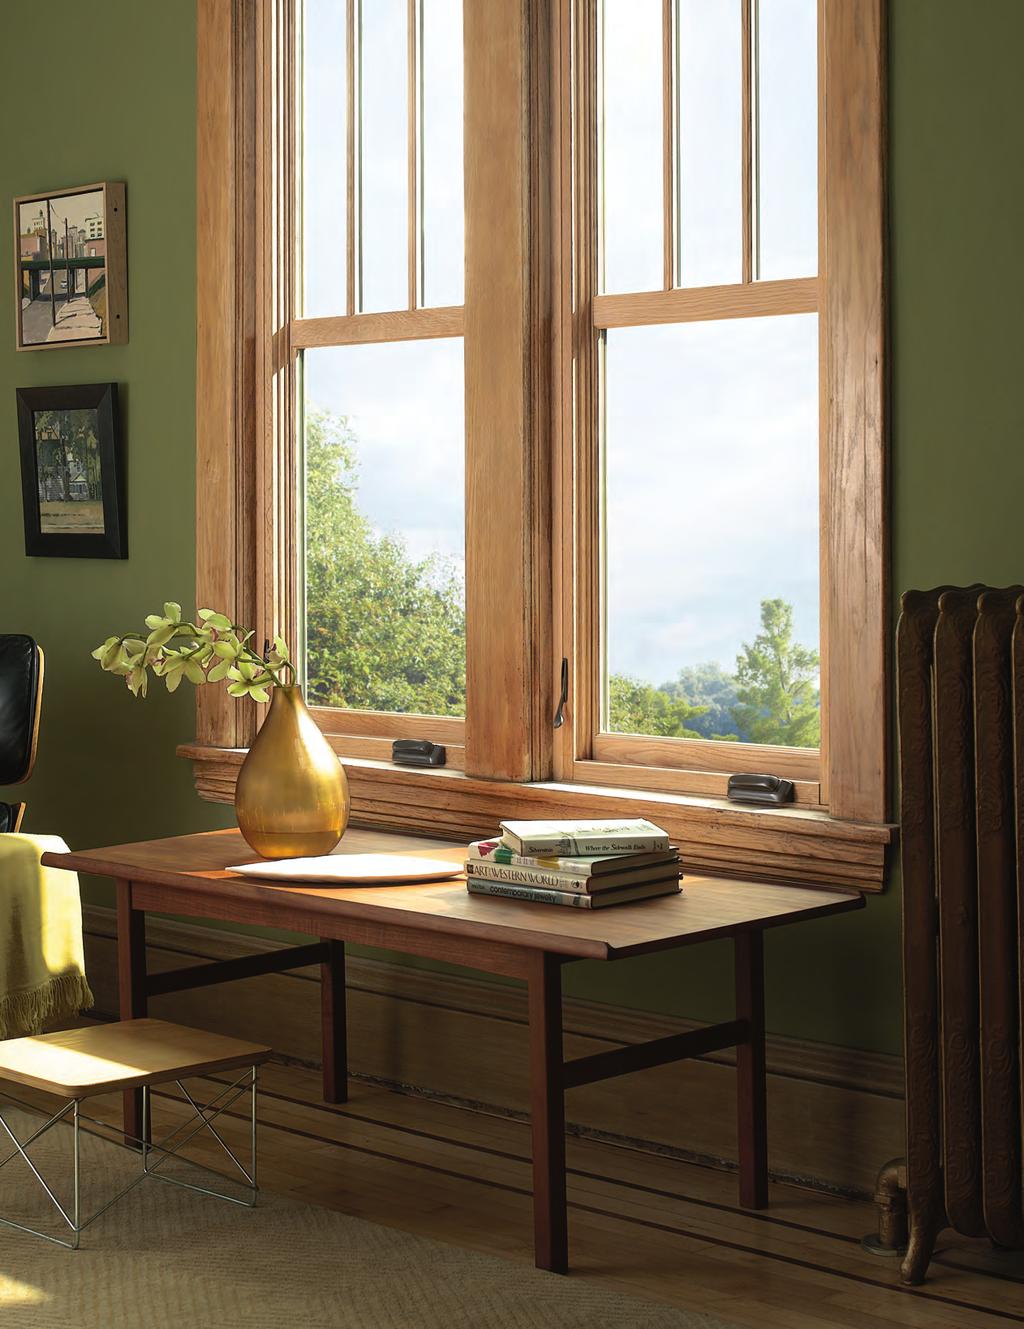 25 ULTIMATE REPLACEMENT CASEMENT This window offers a flush, contemporary exterior and a narrow jamb, making it perfect for frame-in-frame replacement applications.